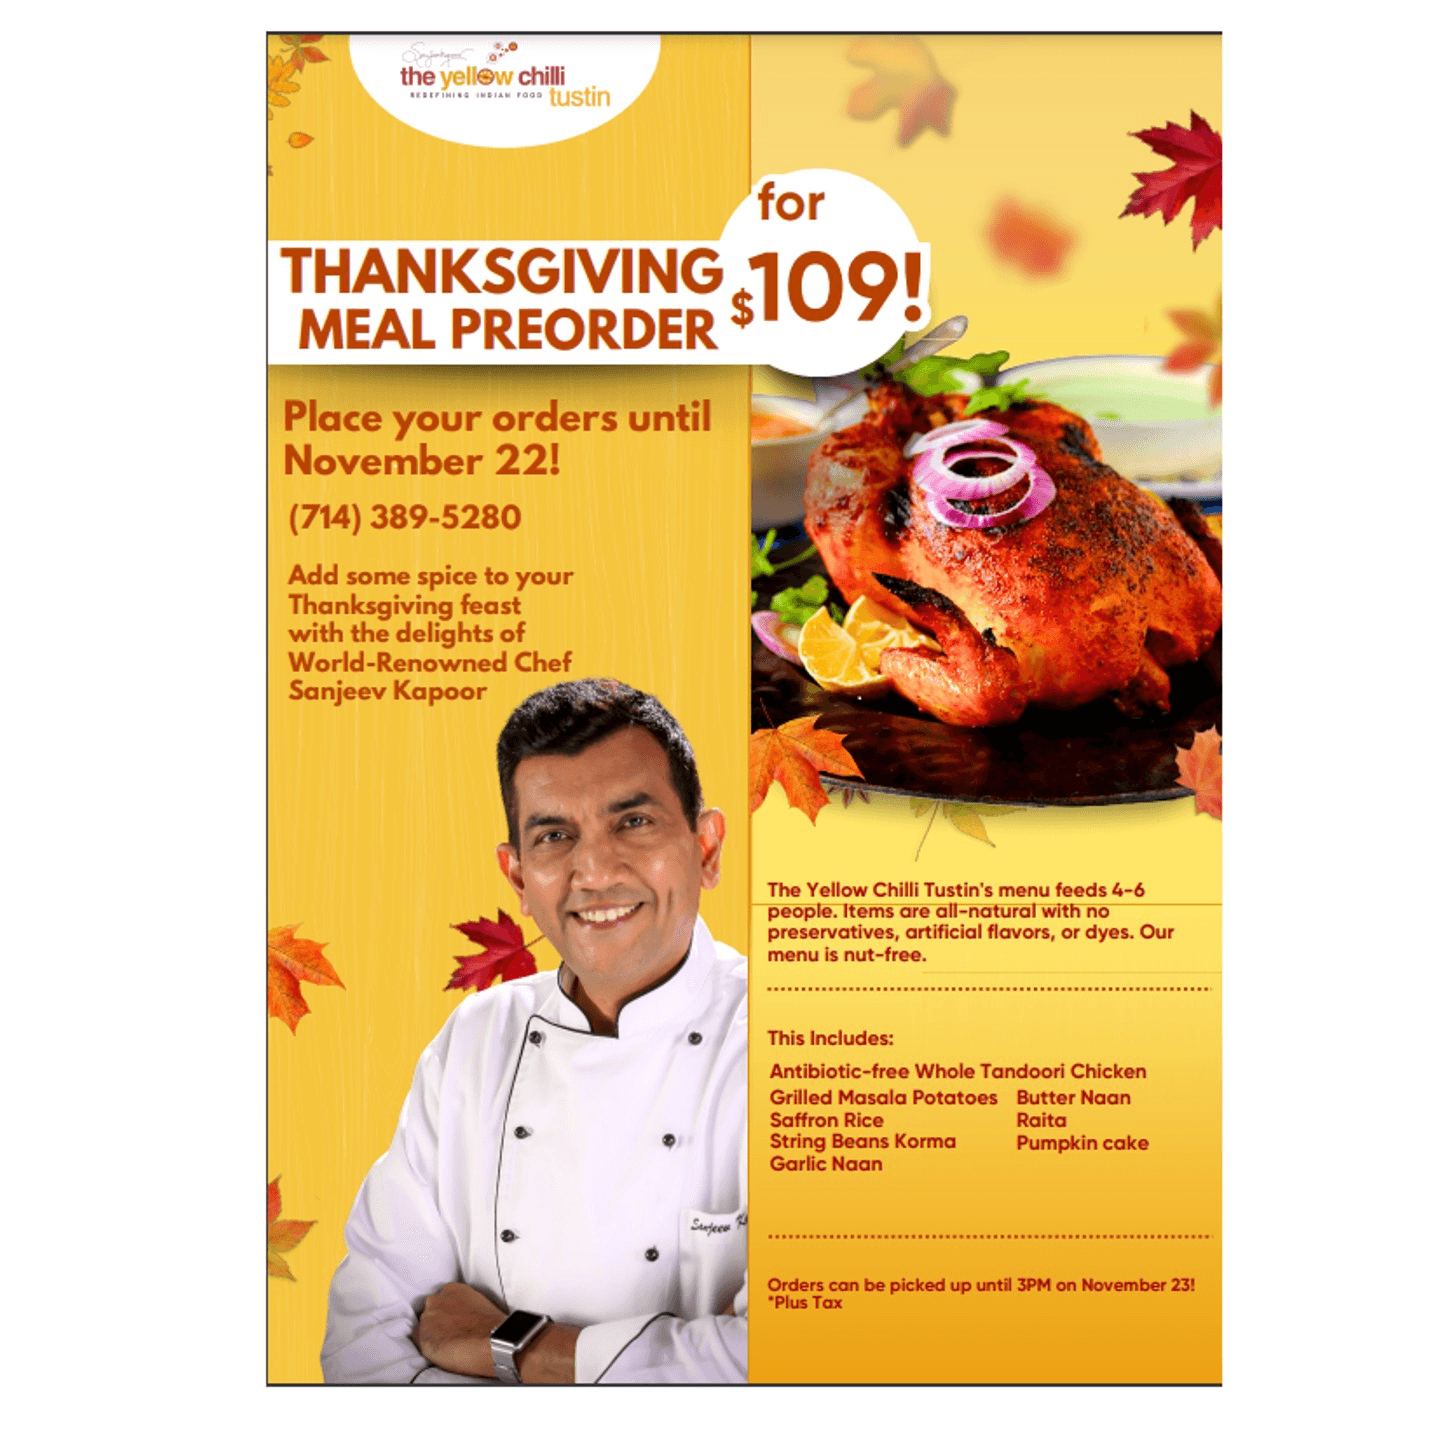 THANKSGIVING MEAL PREORDER for $109.